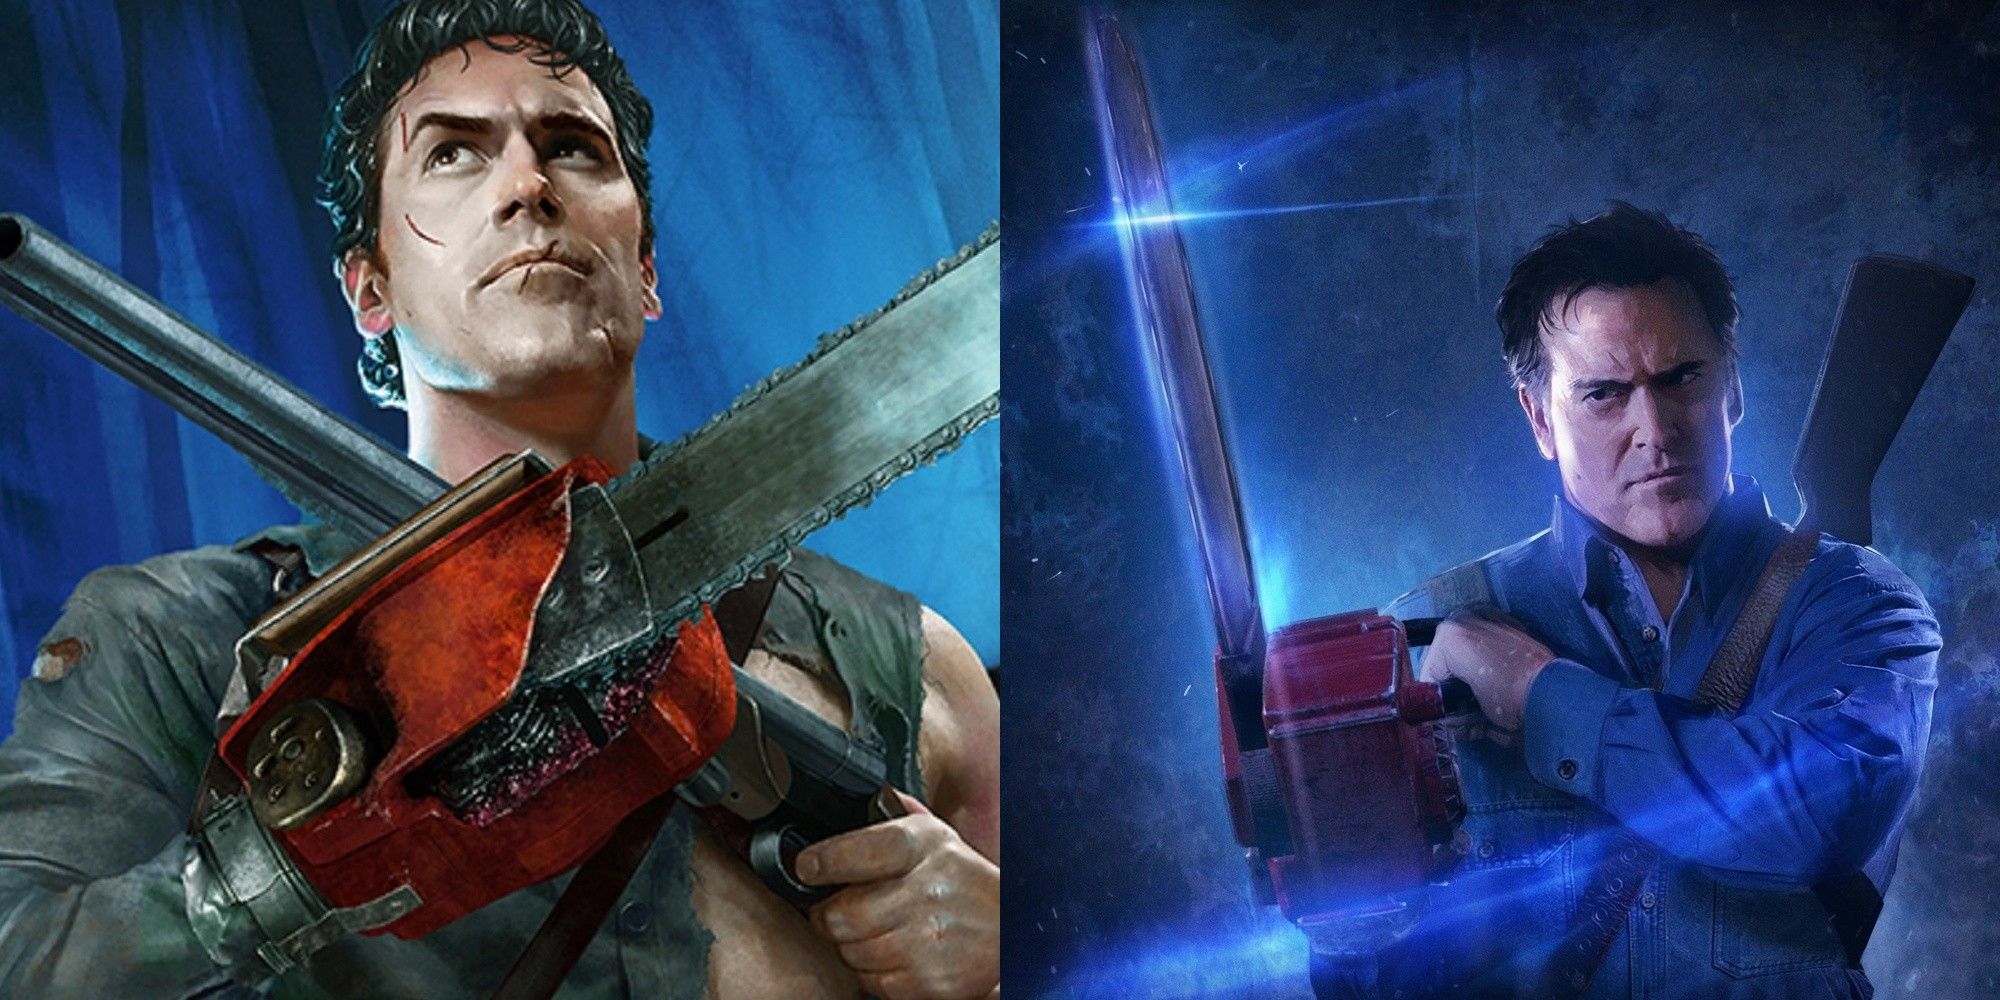 Evil Dead: The Game - DLC Roadmap, upcoming season pass and new